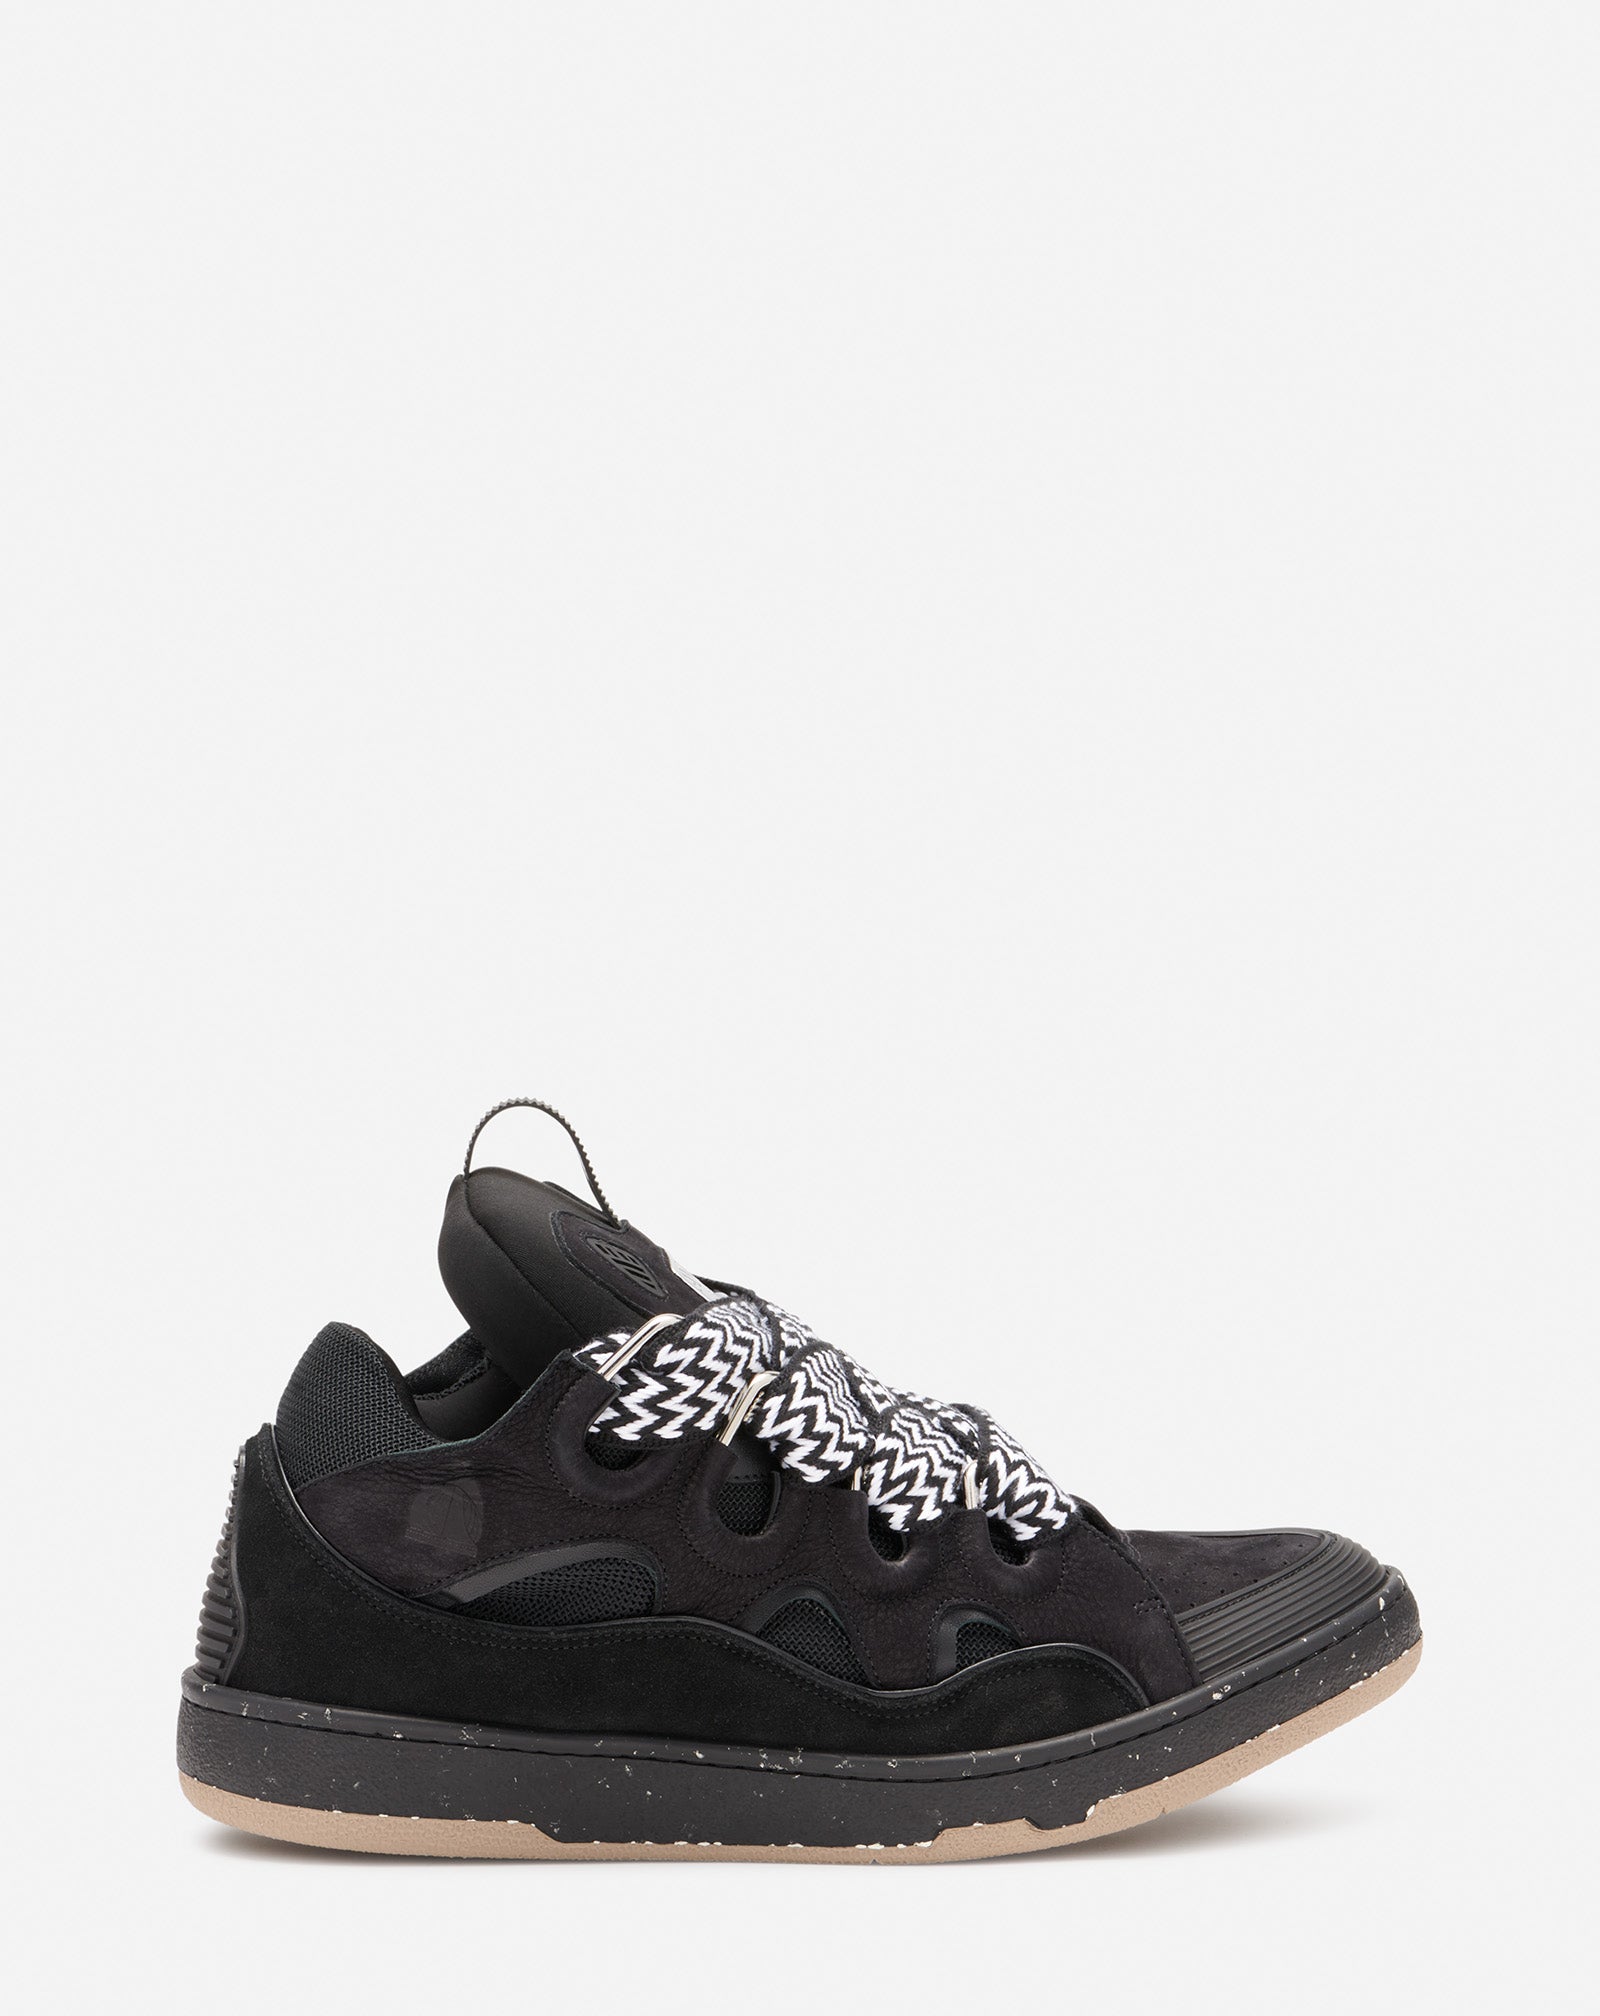 LEATHER CURB SNEAKERS, BLACK